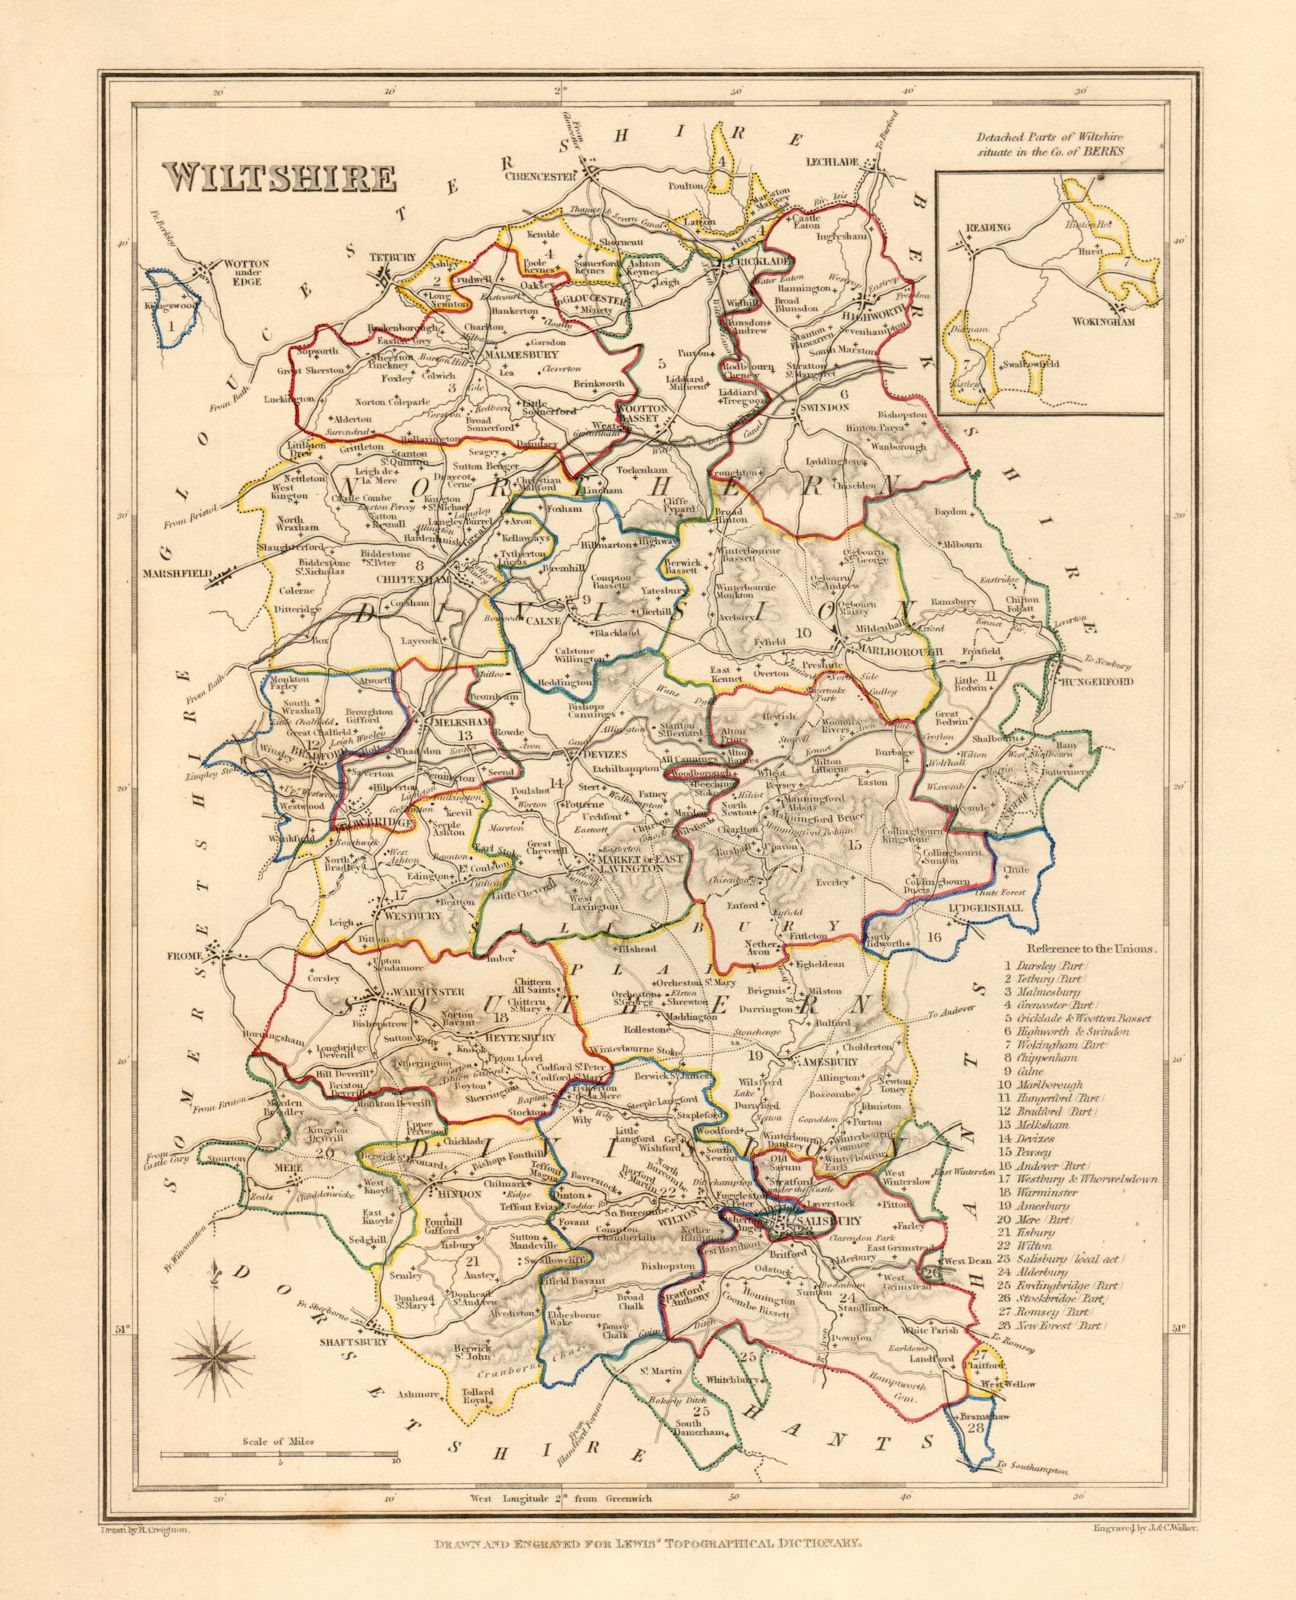 Associate Product Antique county map of WILTSHIRE by Creighton & Walker for Lewis c1840 old